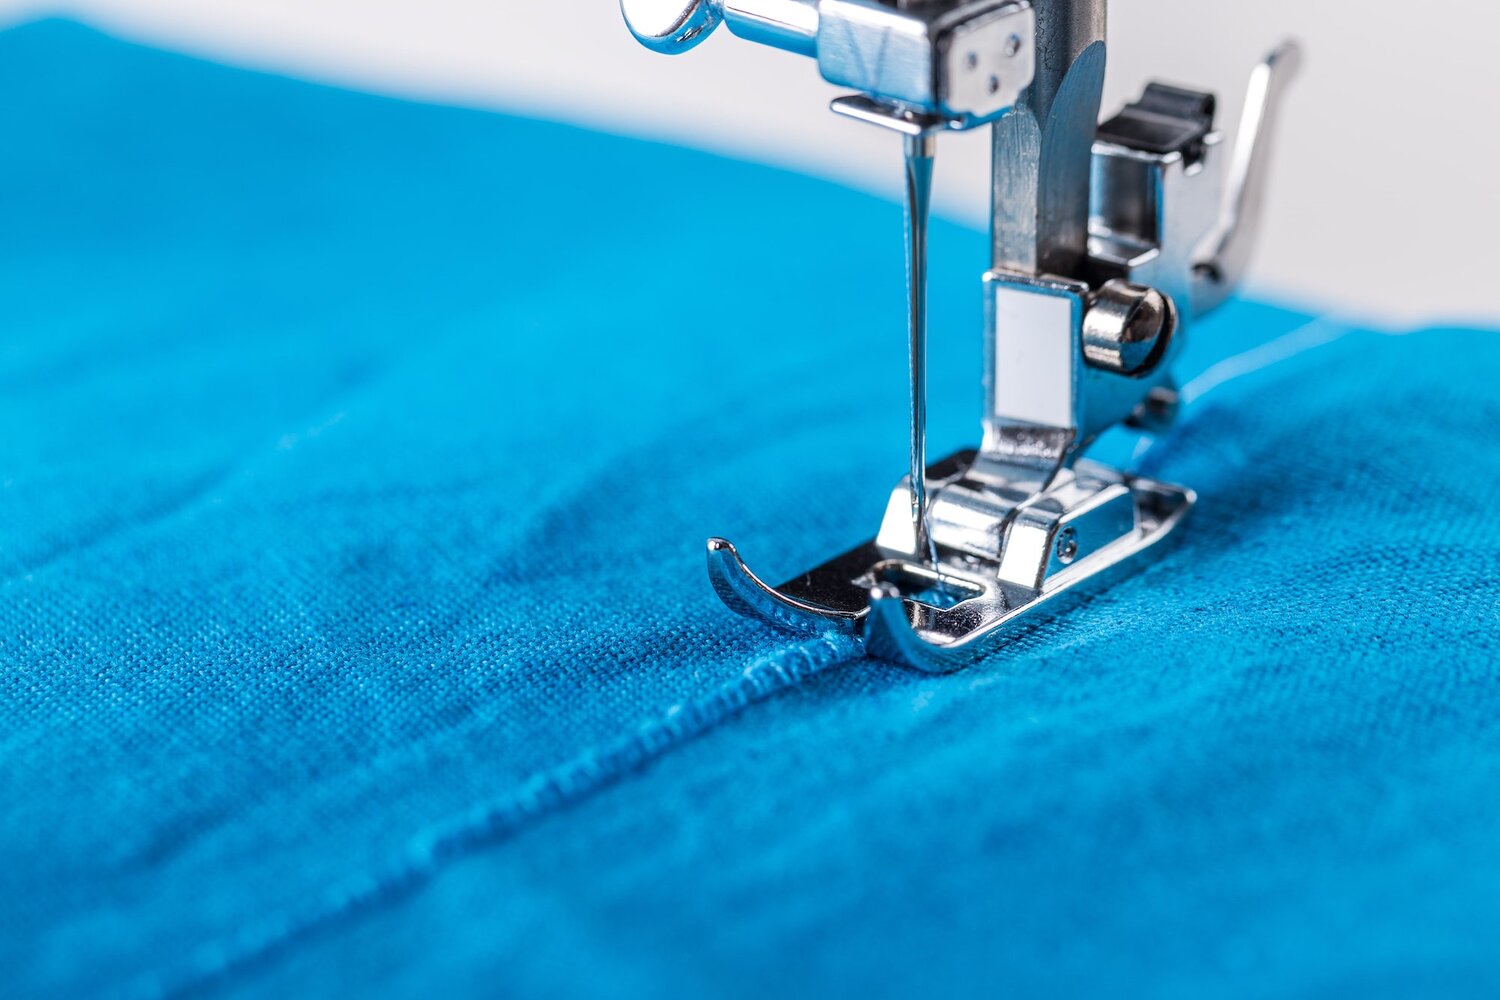 Sewing Things | Sewn Product Services | Product Development Firm | Seattle,  WA